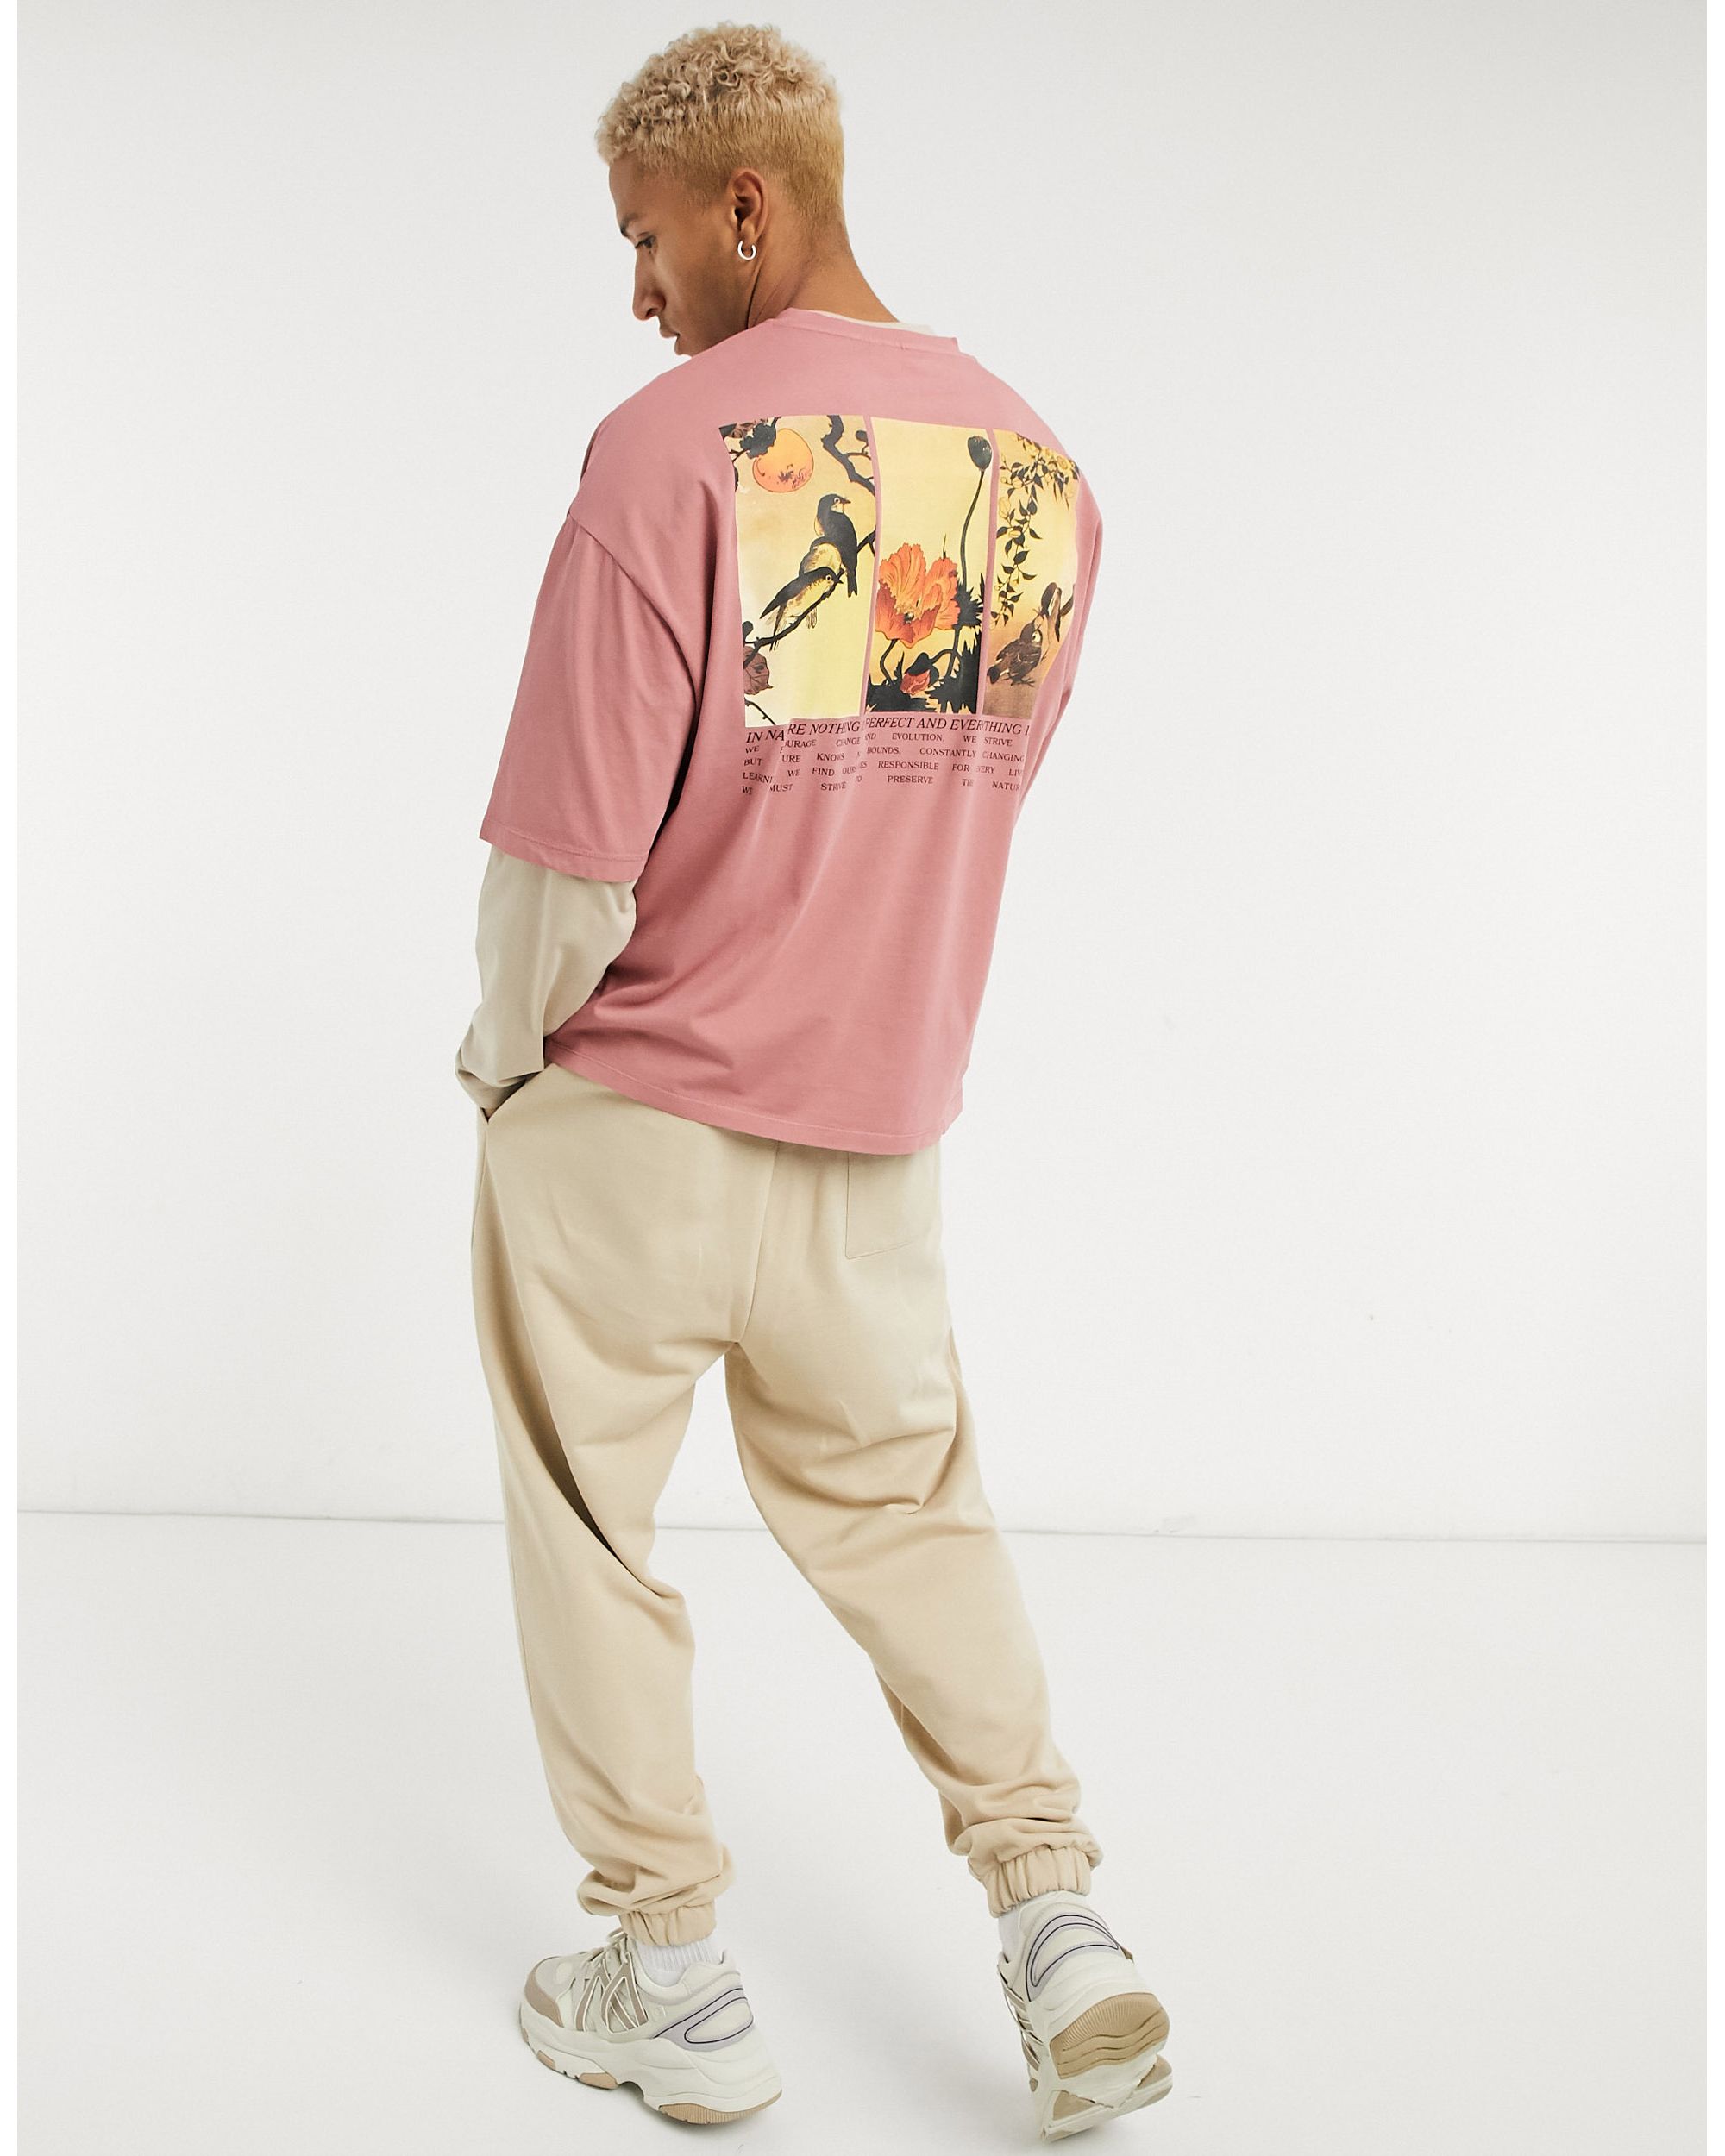 ASOS DESIGN oversized t-shirt with back box artistic print in beige in acid wash